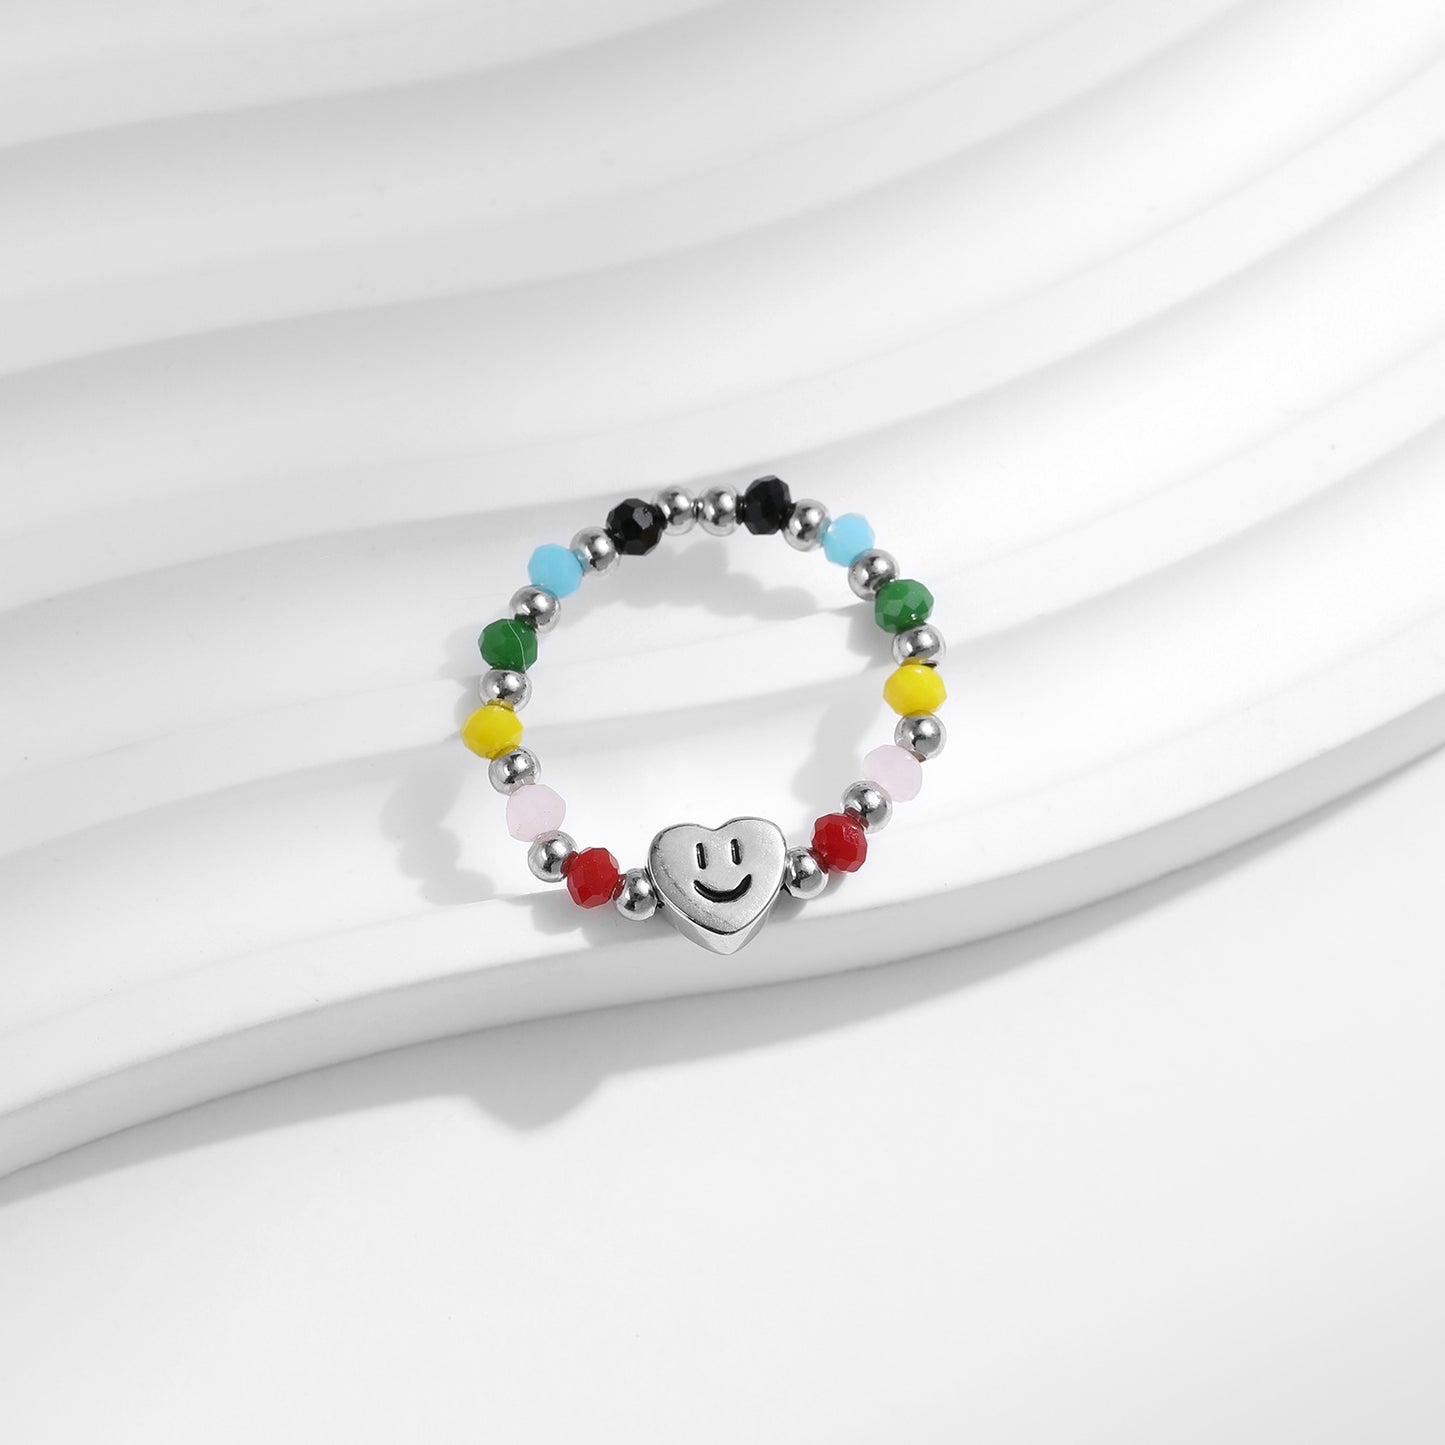 Adjustable S925 Sterling Silver Ring with Sweet Heart and Smile Face Beads